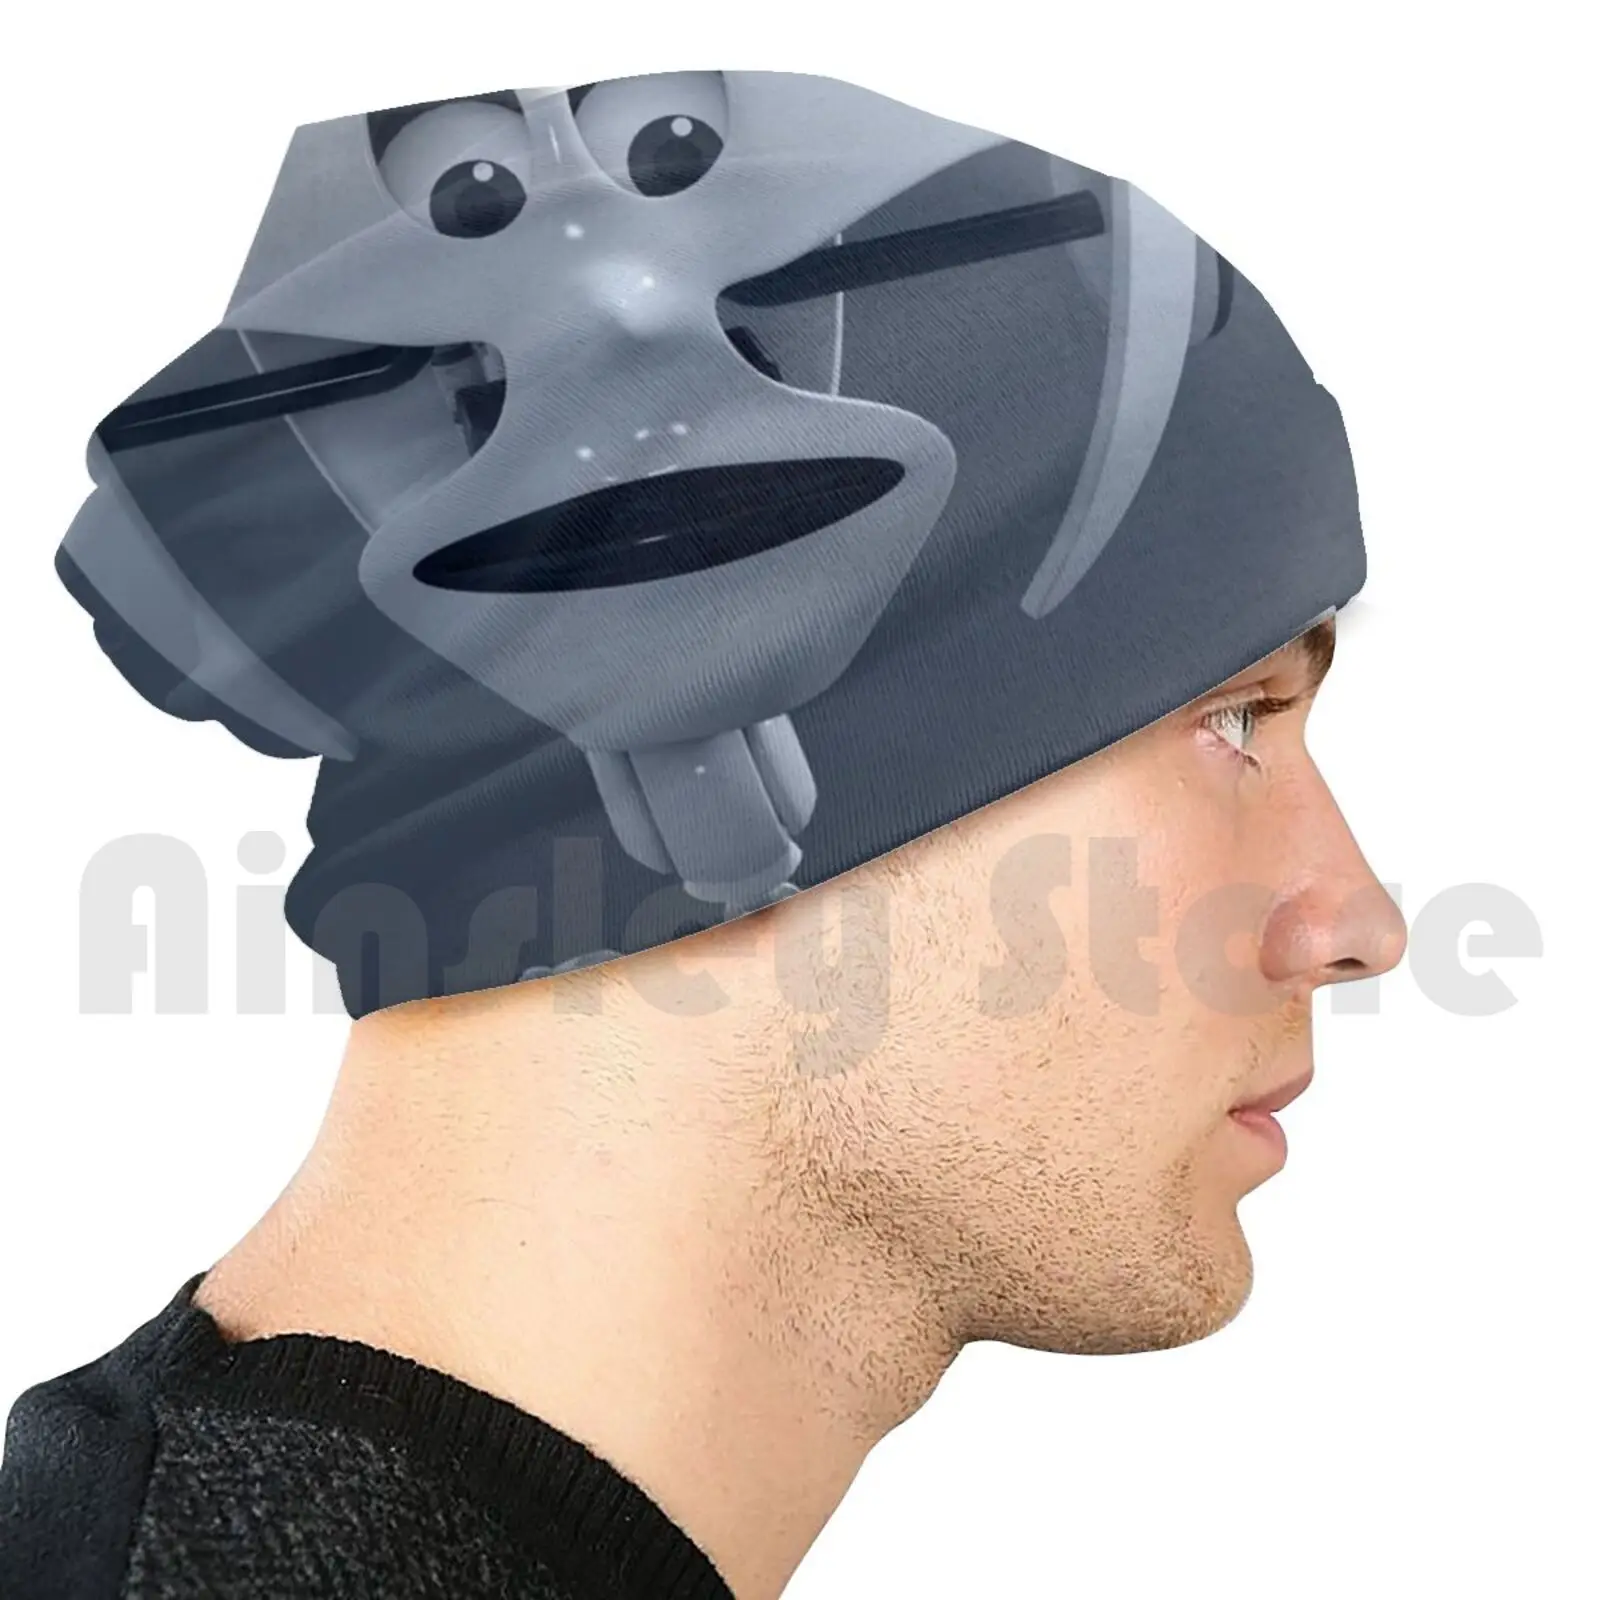 

This Is Usually An Electromechanical System That Beanies Pullover Cap Comfortable By Their Appearance Or Their